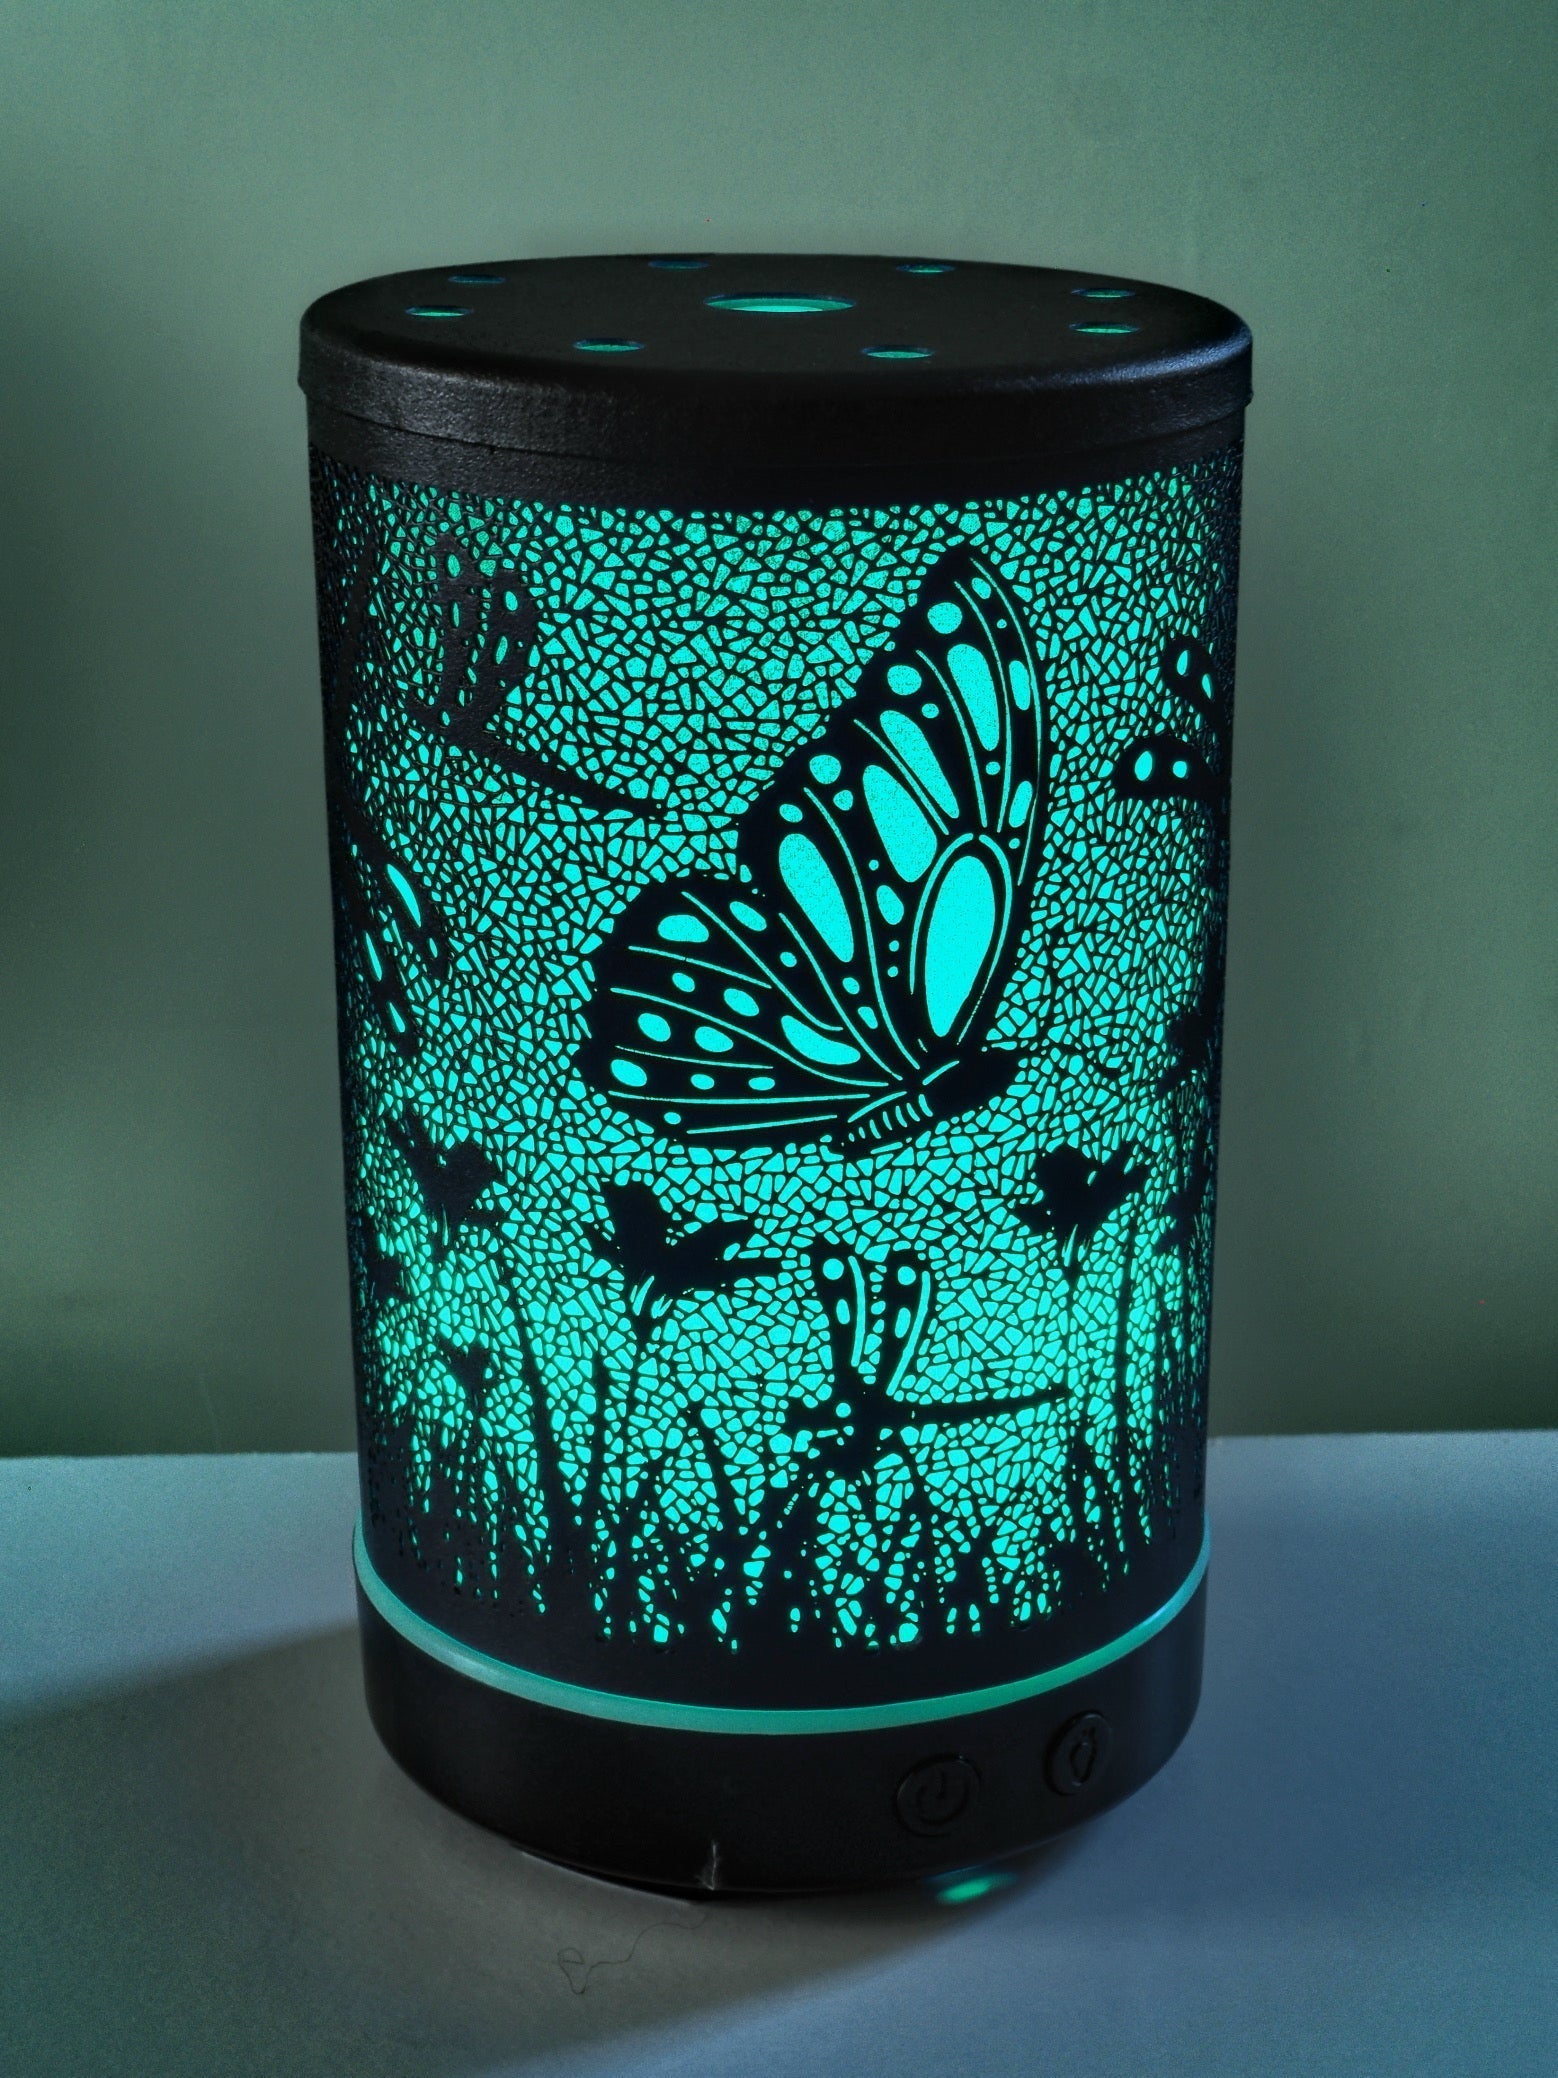 Mesmerizing butterflies and dragonflies essential oil diffuser.